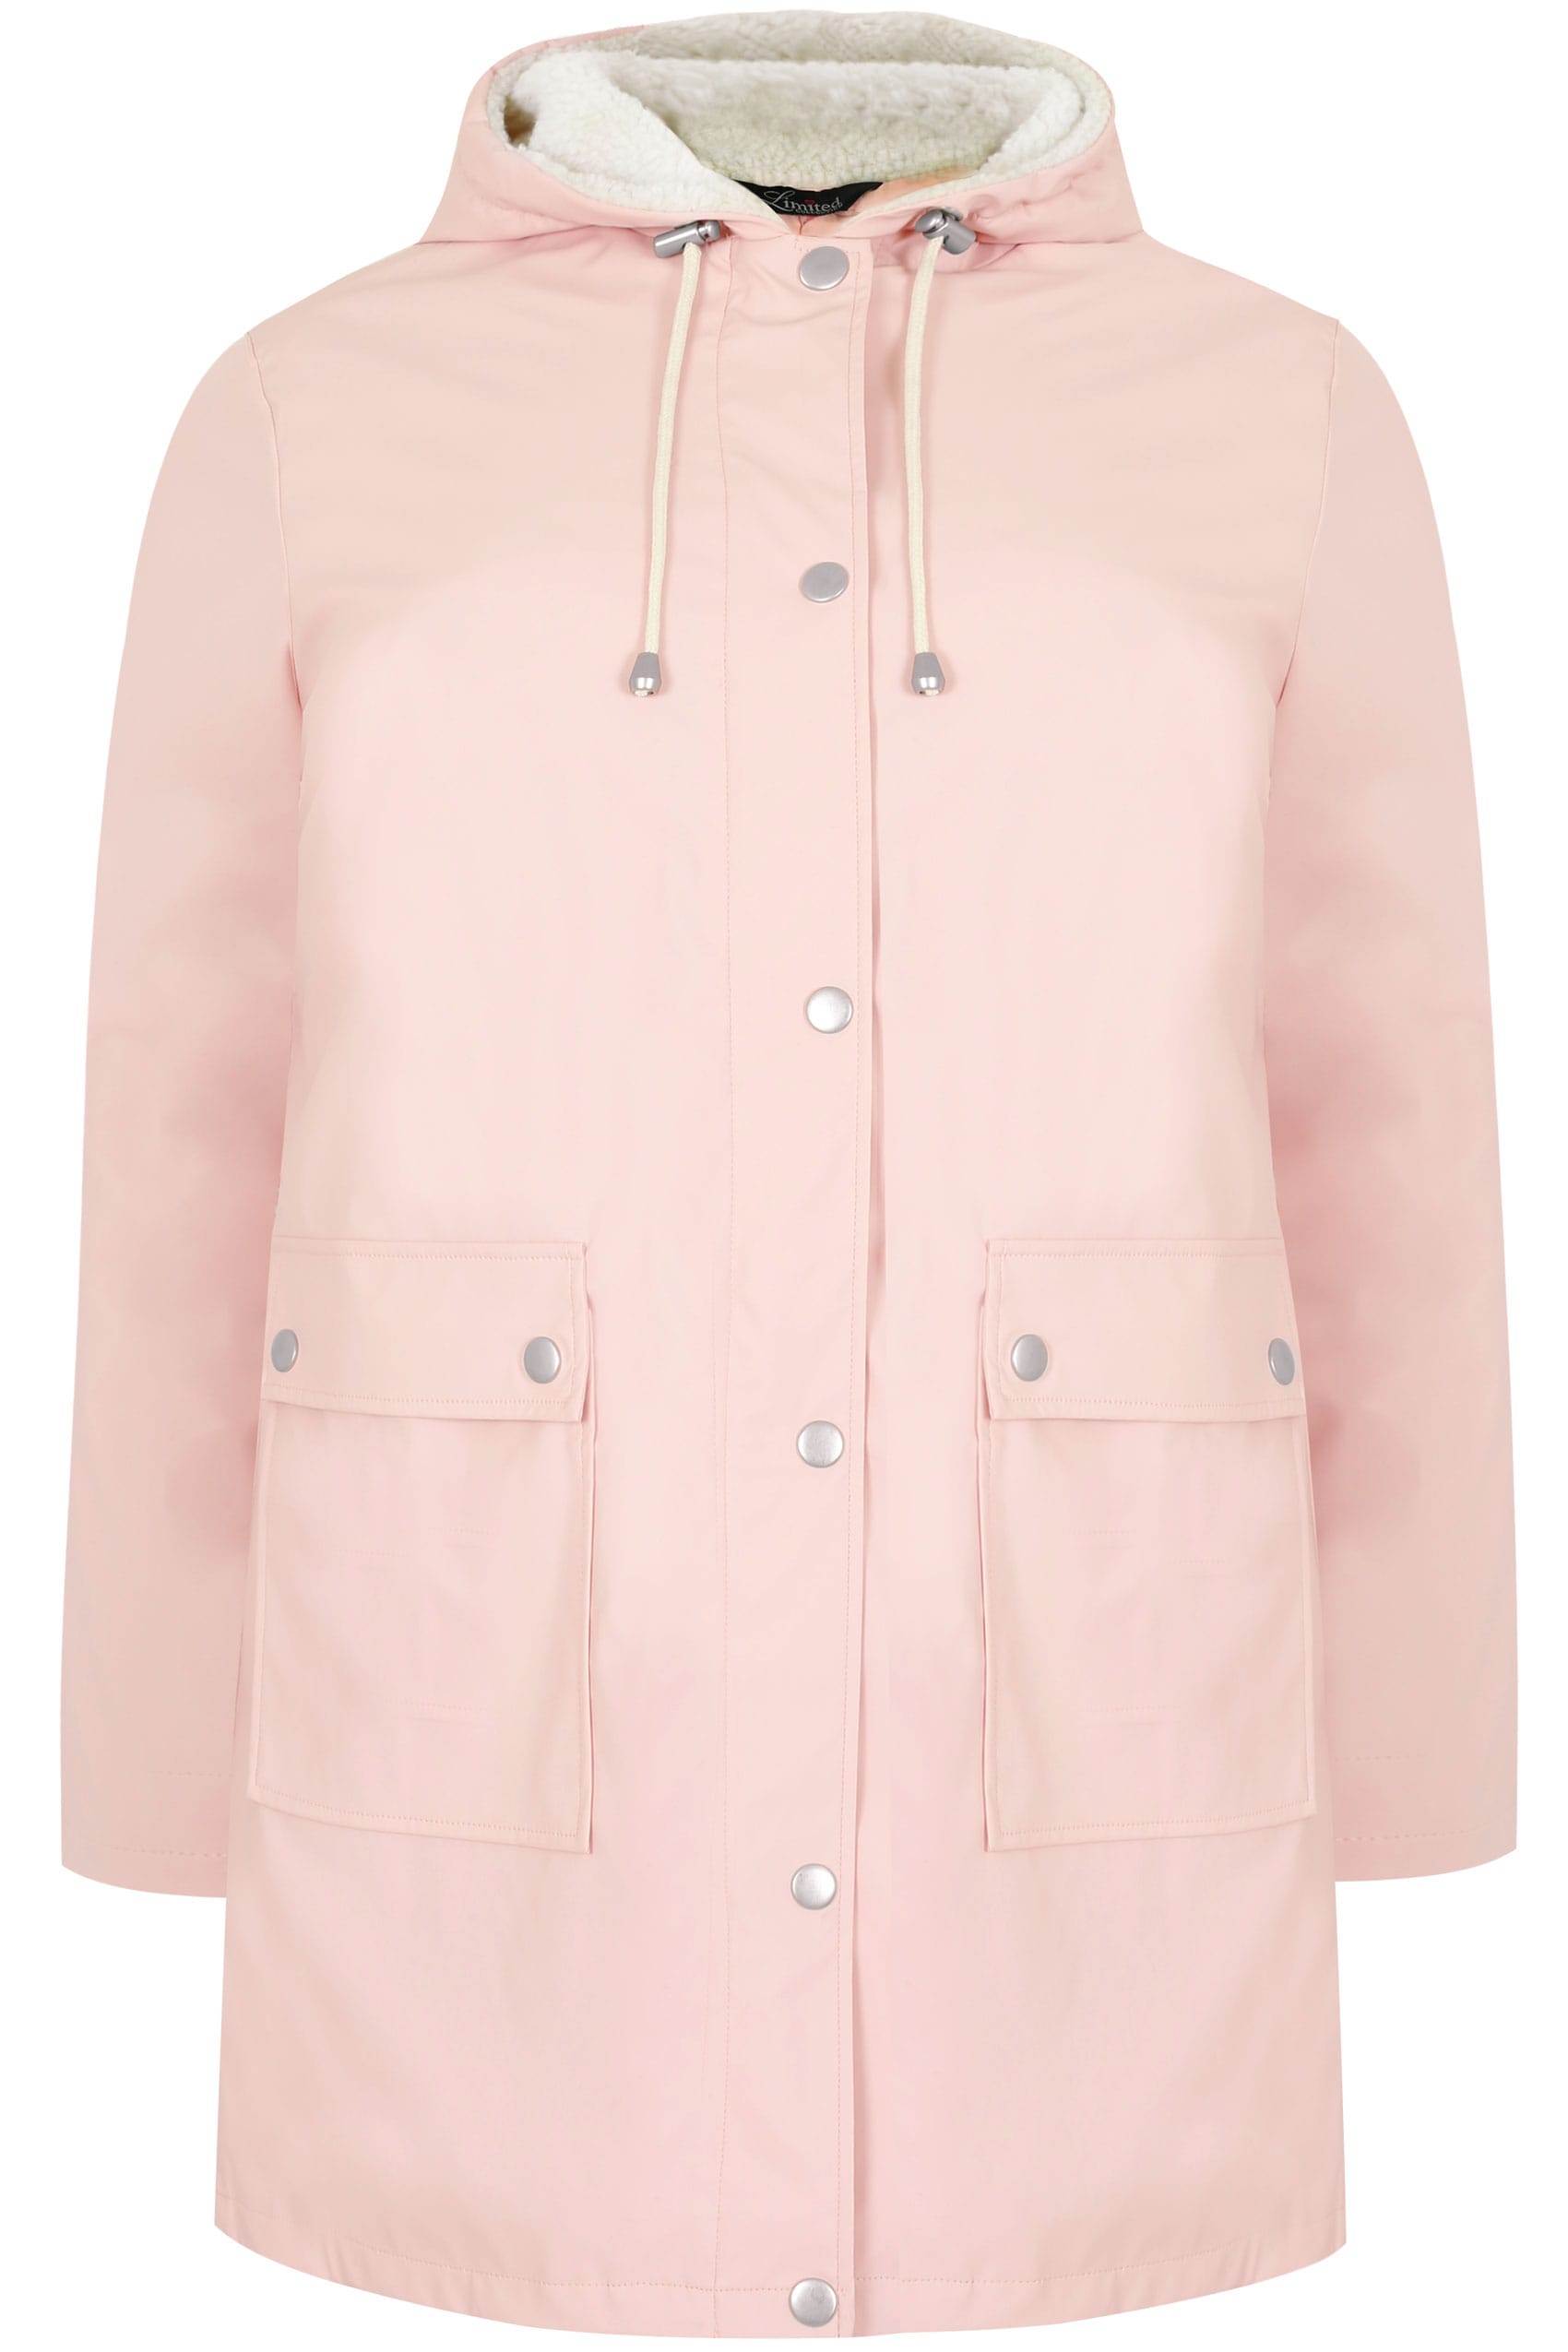 LIMITED COLLECTION Pink Coated Mac With Sherpa Lined Hood, Plus size 16 ...